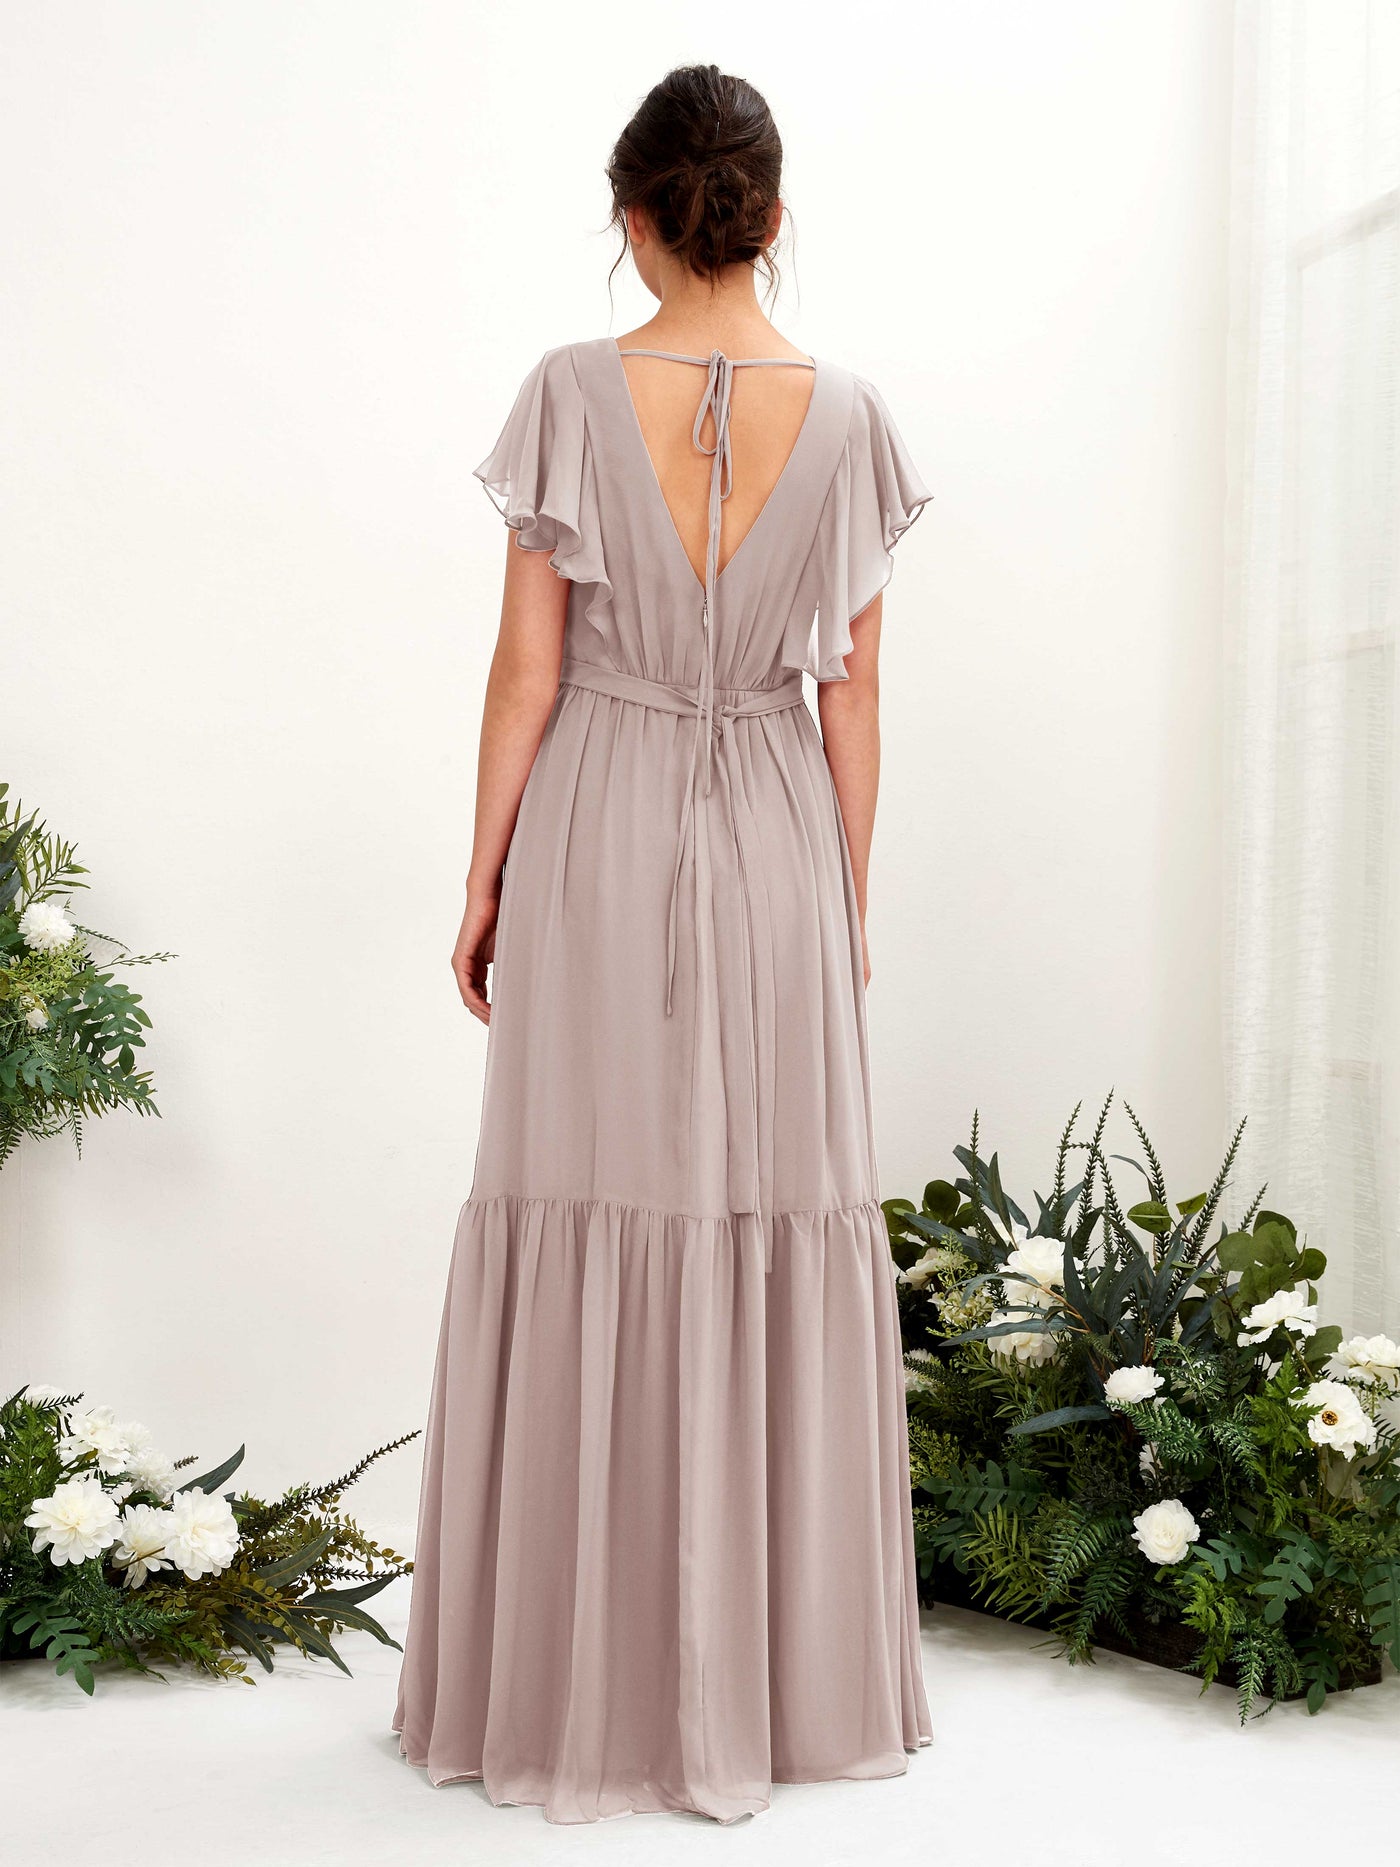 Taupe Bridesmaid Dresses Bridesmaid Dress A-line Chiffon V-neck Full Length Short Sleeves Wedding Party Dress (81225924)#color_taupe